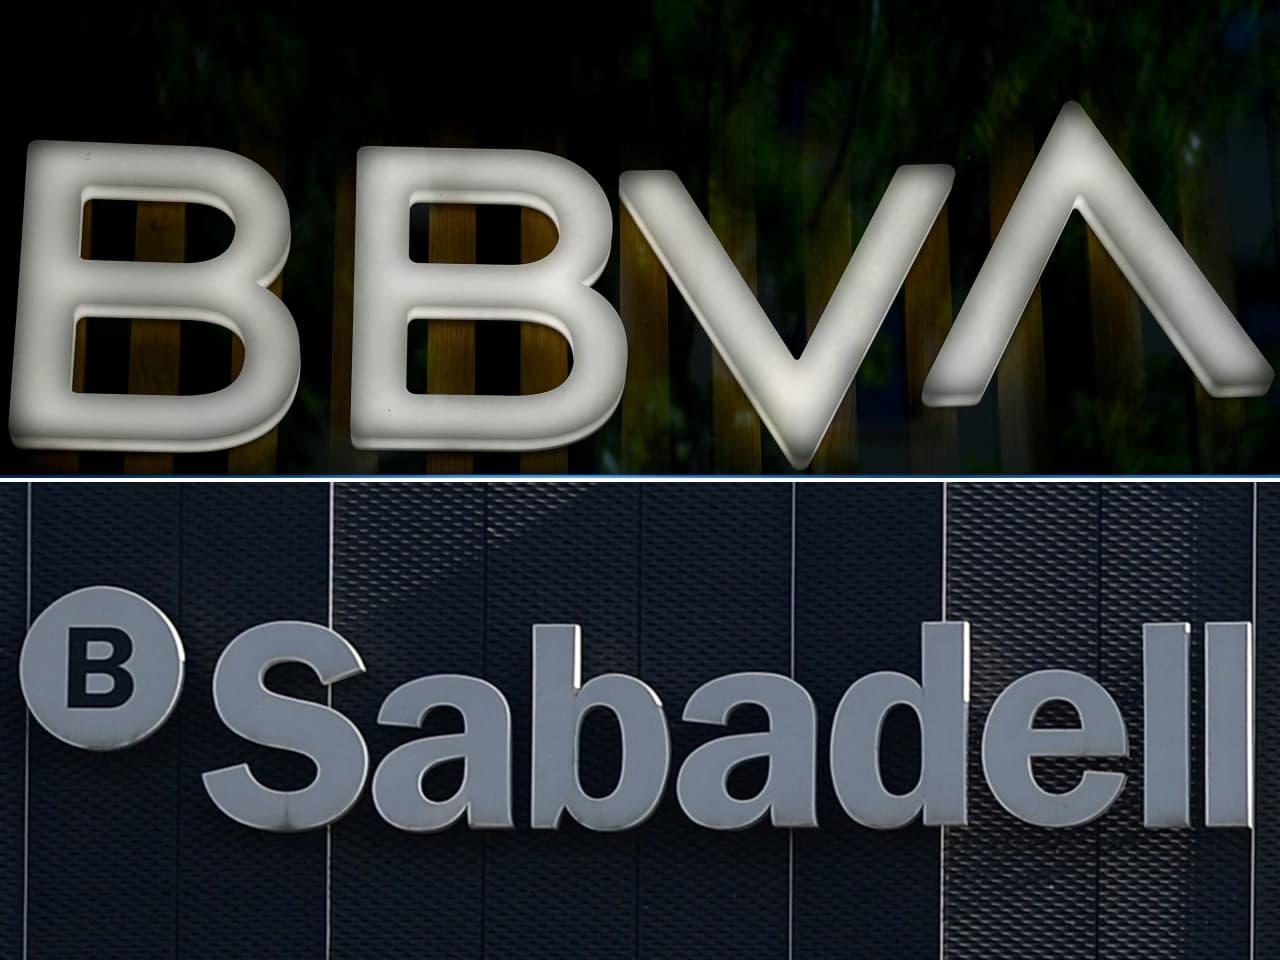 Here’s why BBVA just launched a hostile bid for Santander